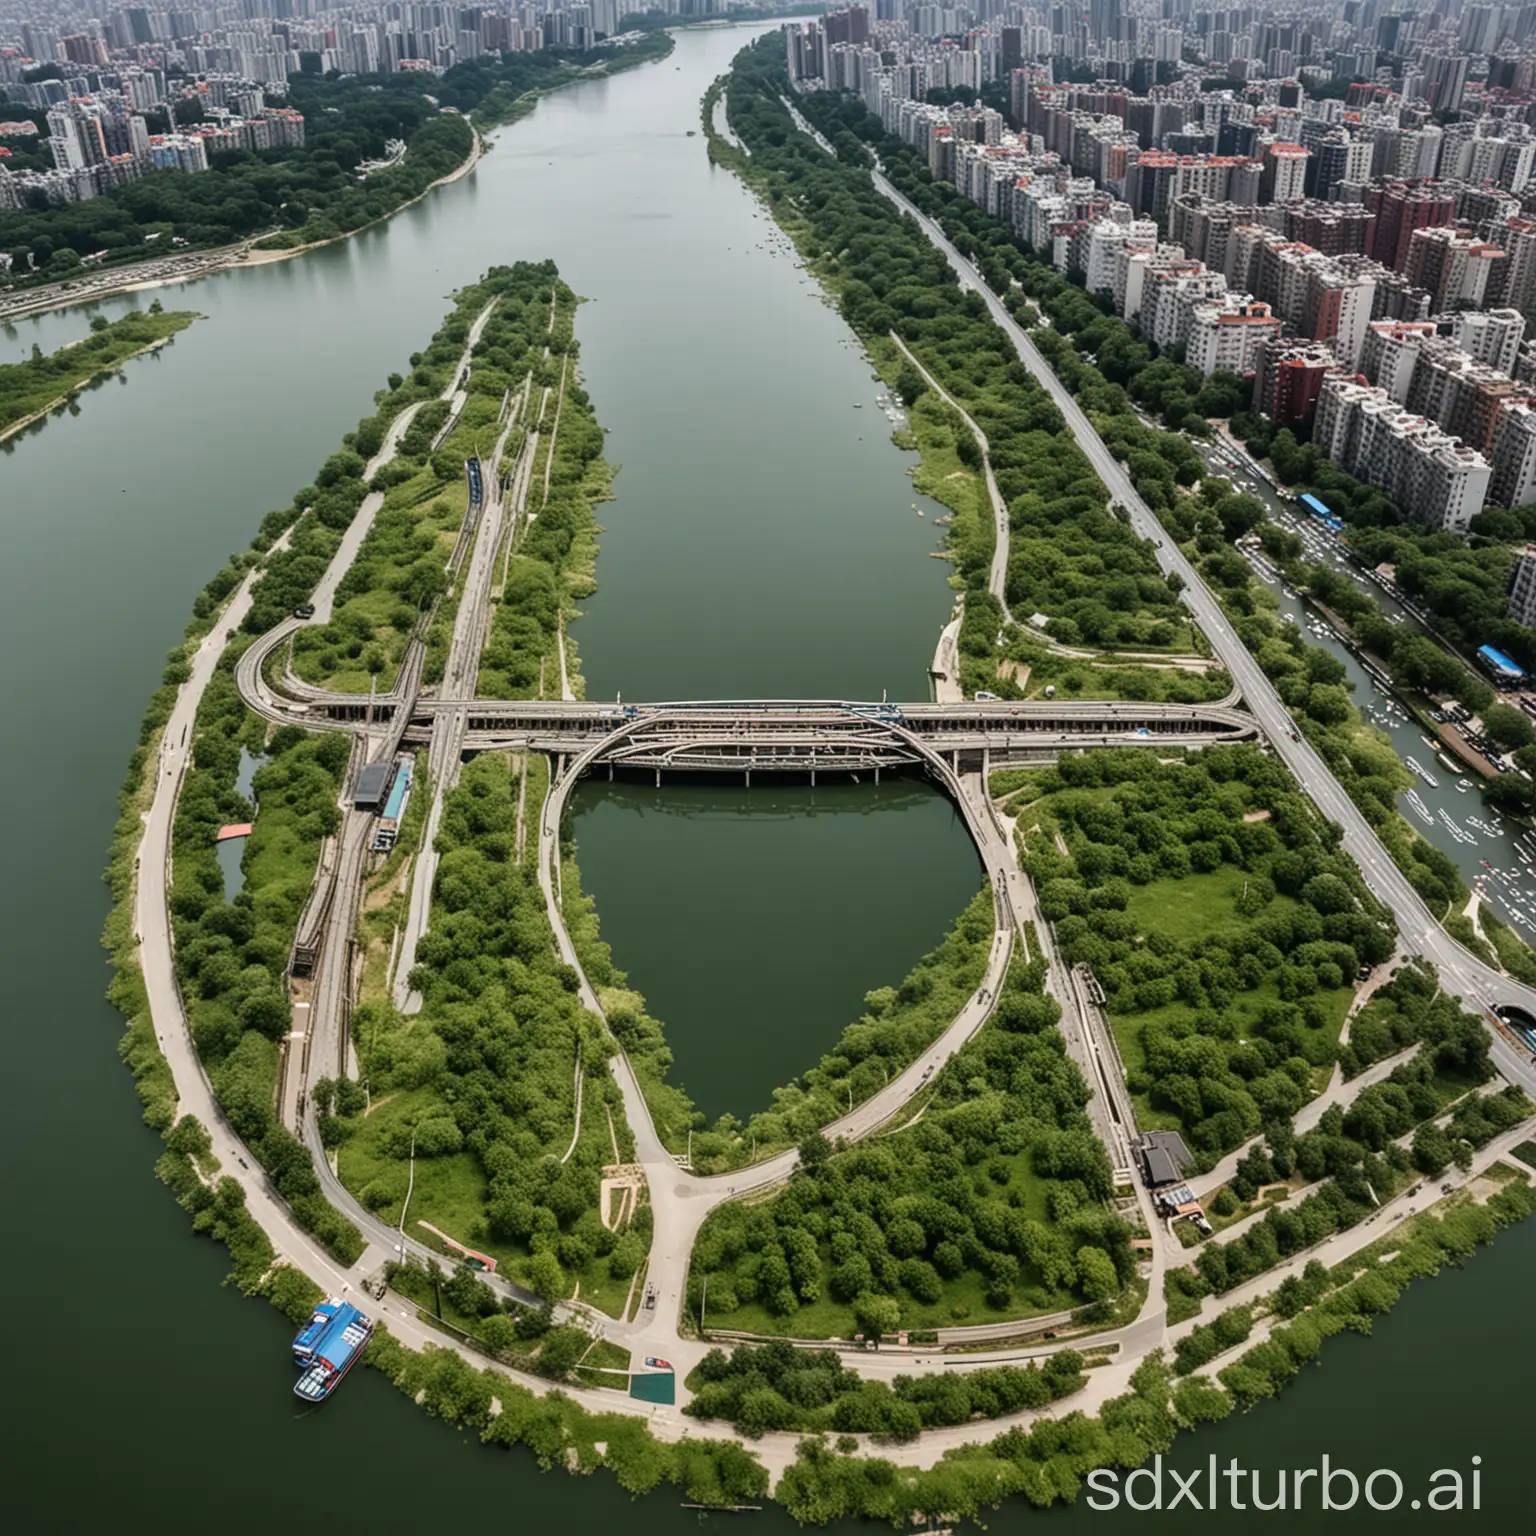 The subway passes through Taihu Lake, wetland park and commercial square